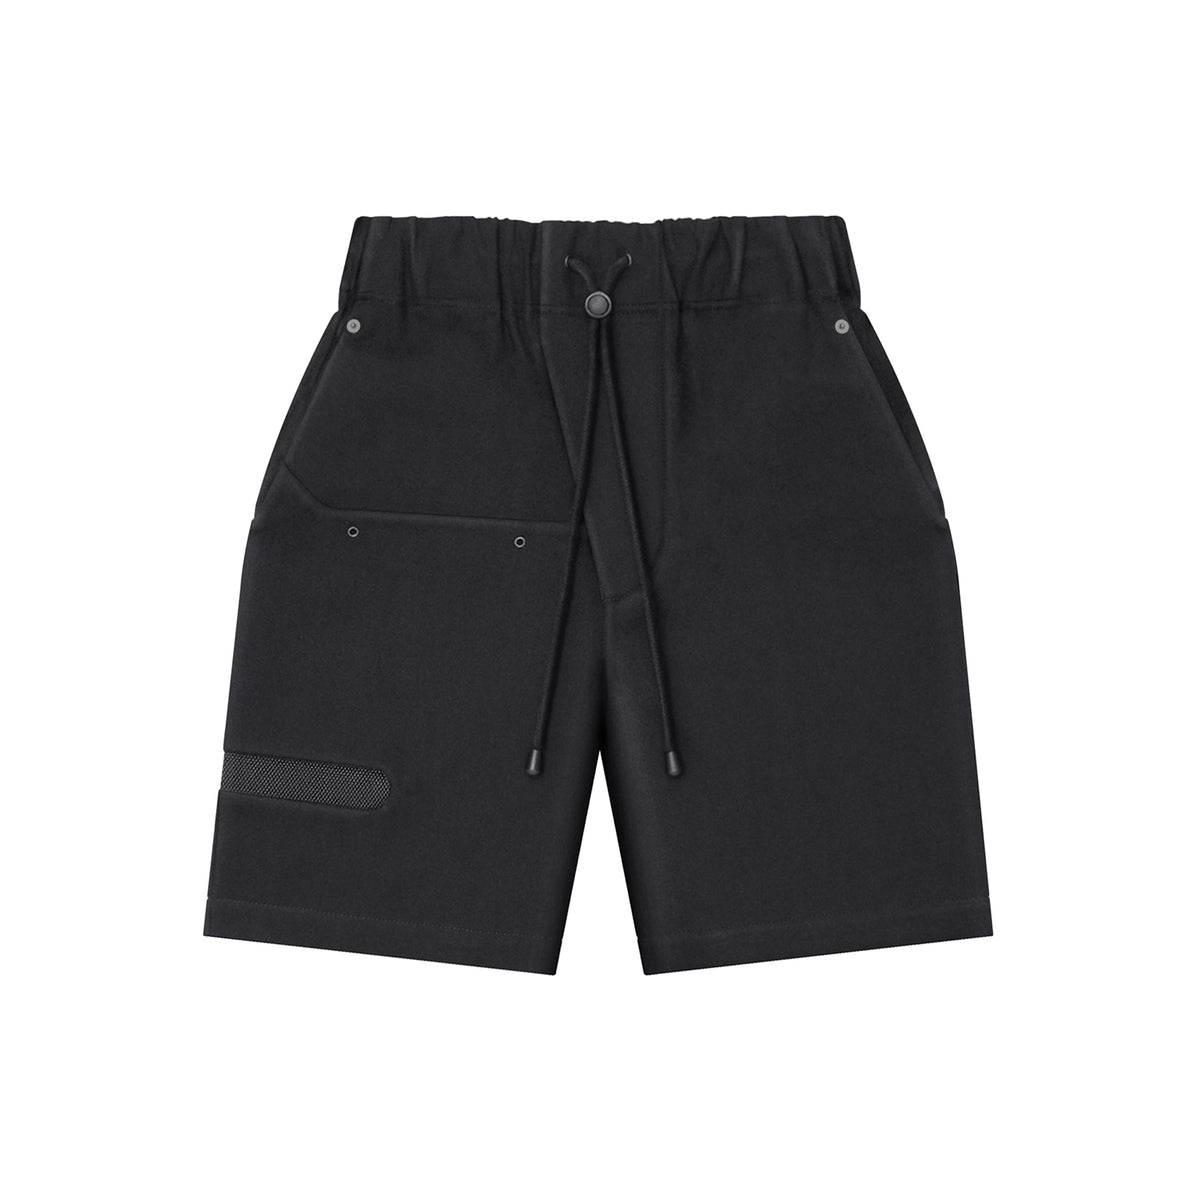 Technical Shorts with Trim [Black]